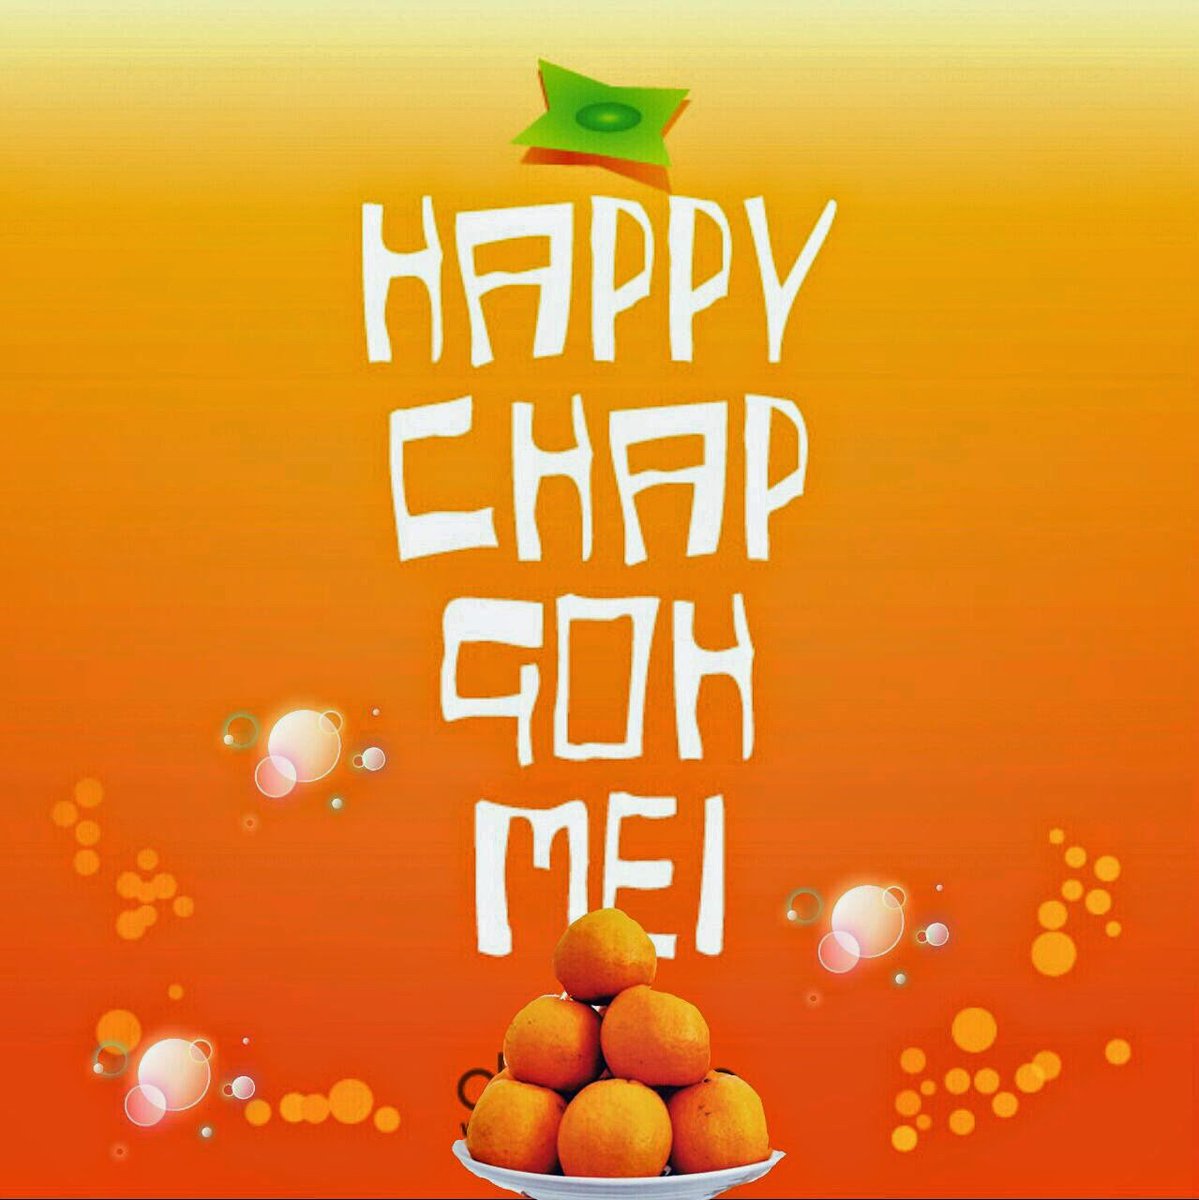 Dr Anita Goh On Twitter Happy Chap Goh Mei Chinese Valentine S Day When Single Women Make Wishes And Then Throw Mandarin Oranges Inscribed With Their Names And Numbers Into